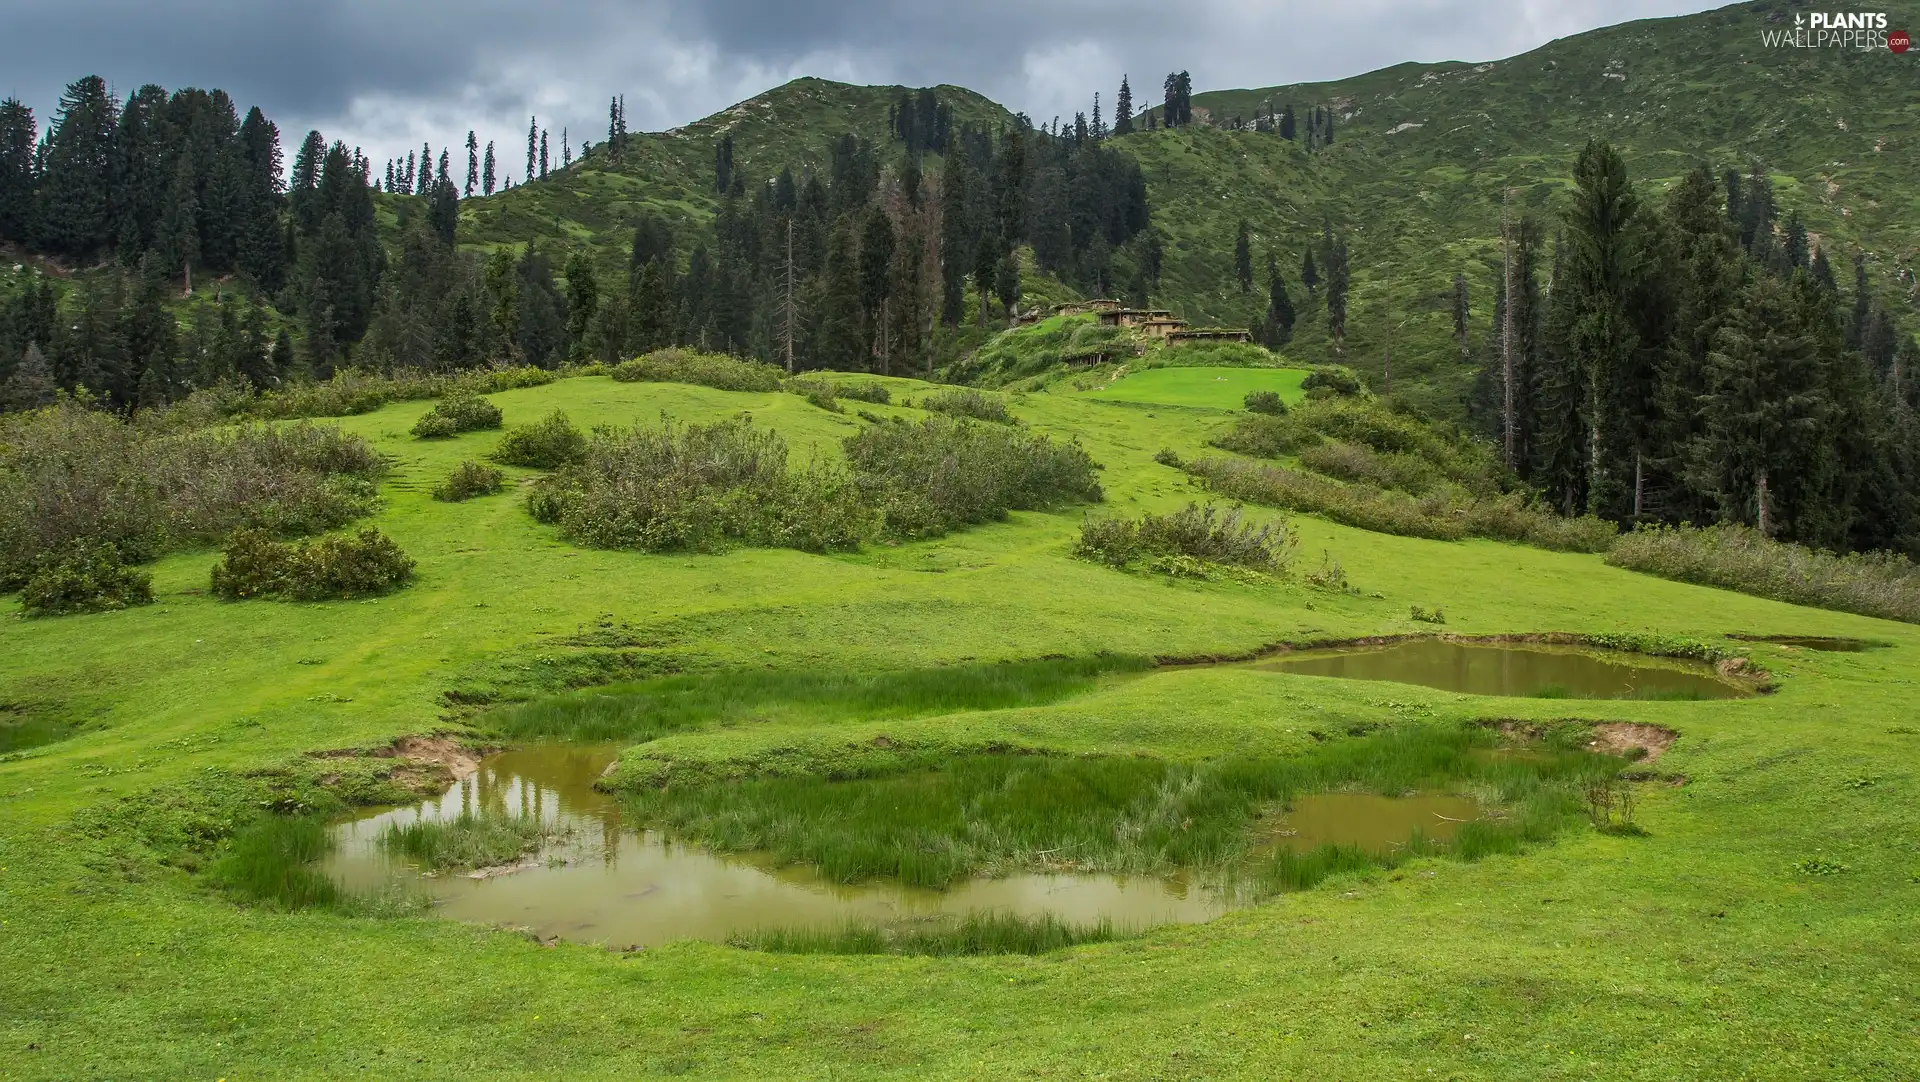 trees, Pond - car, green, car in the meadow, The Hills, viewes, VEGETATION